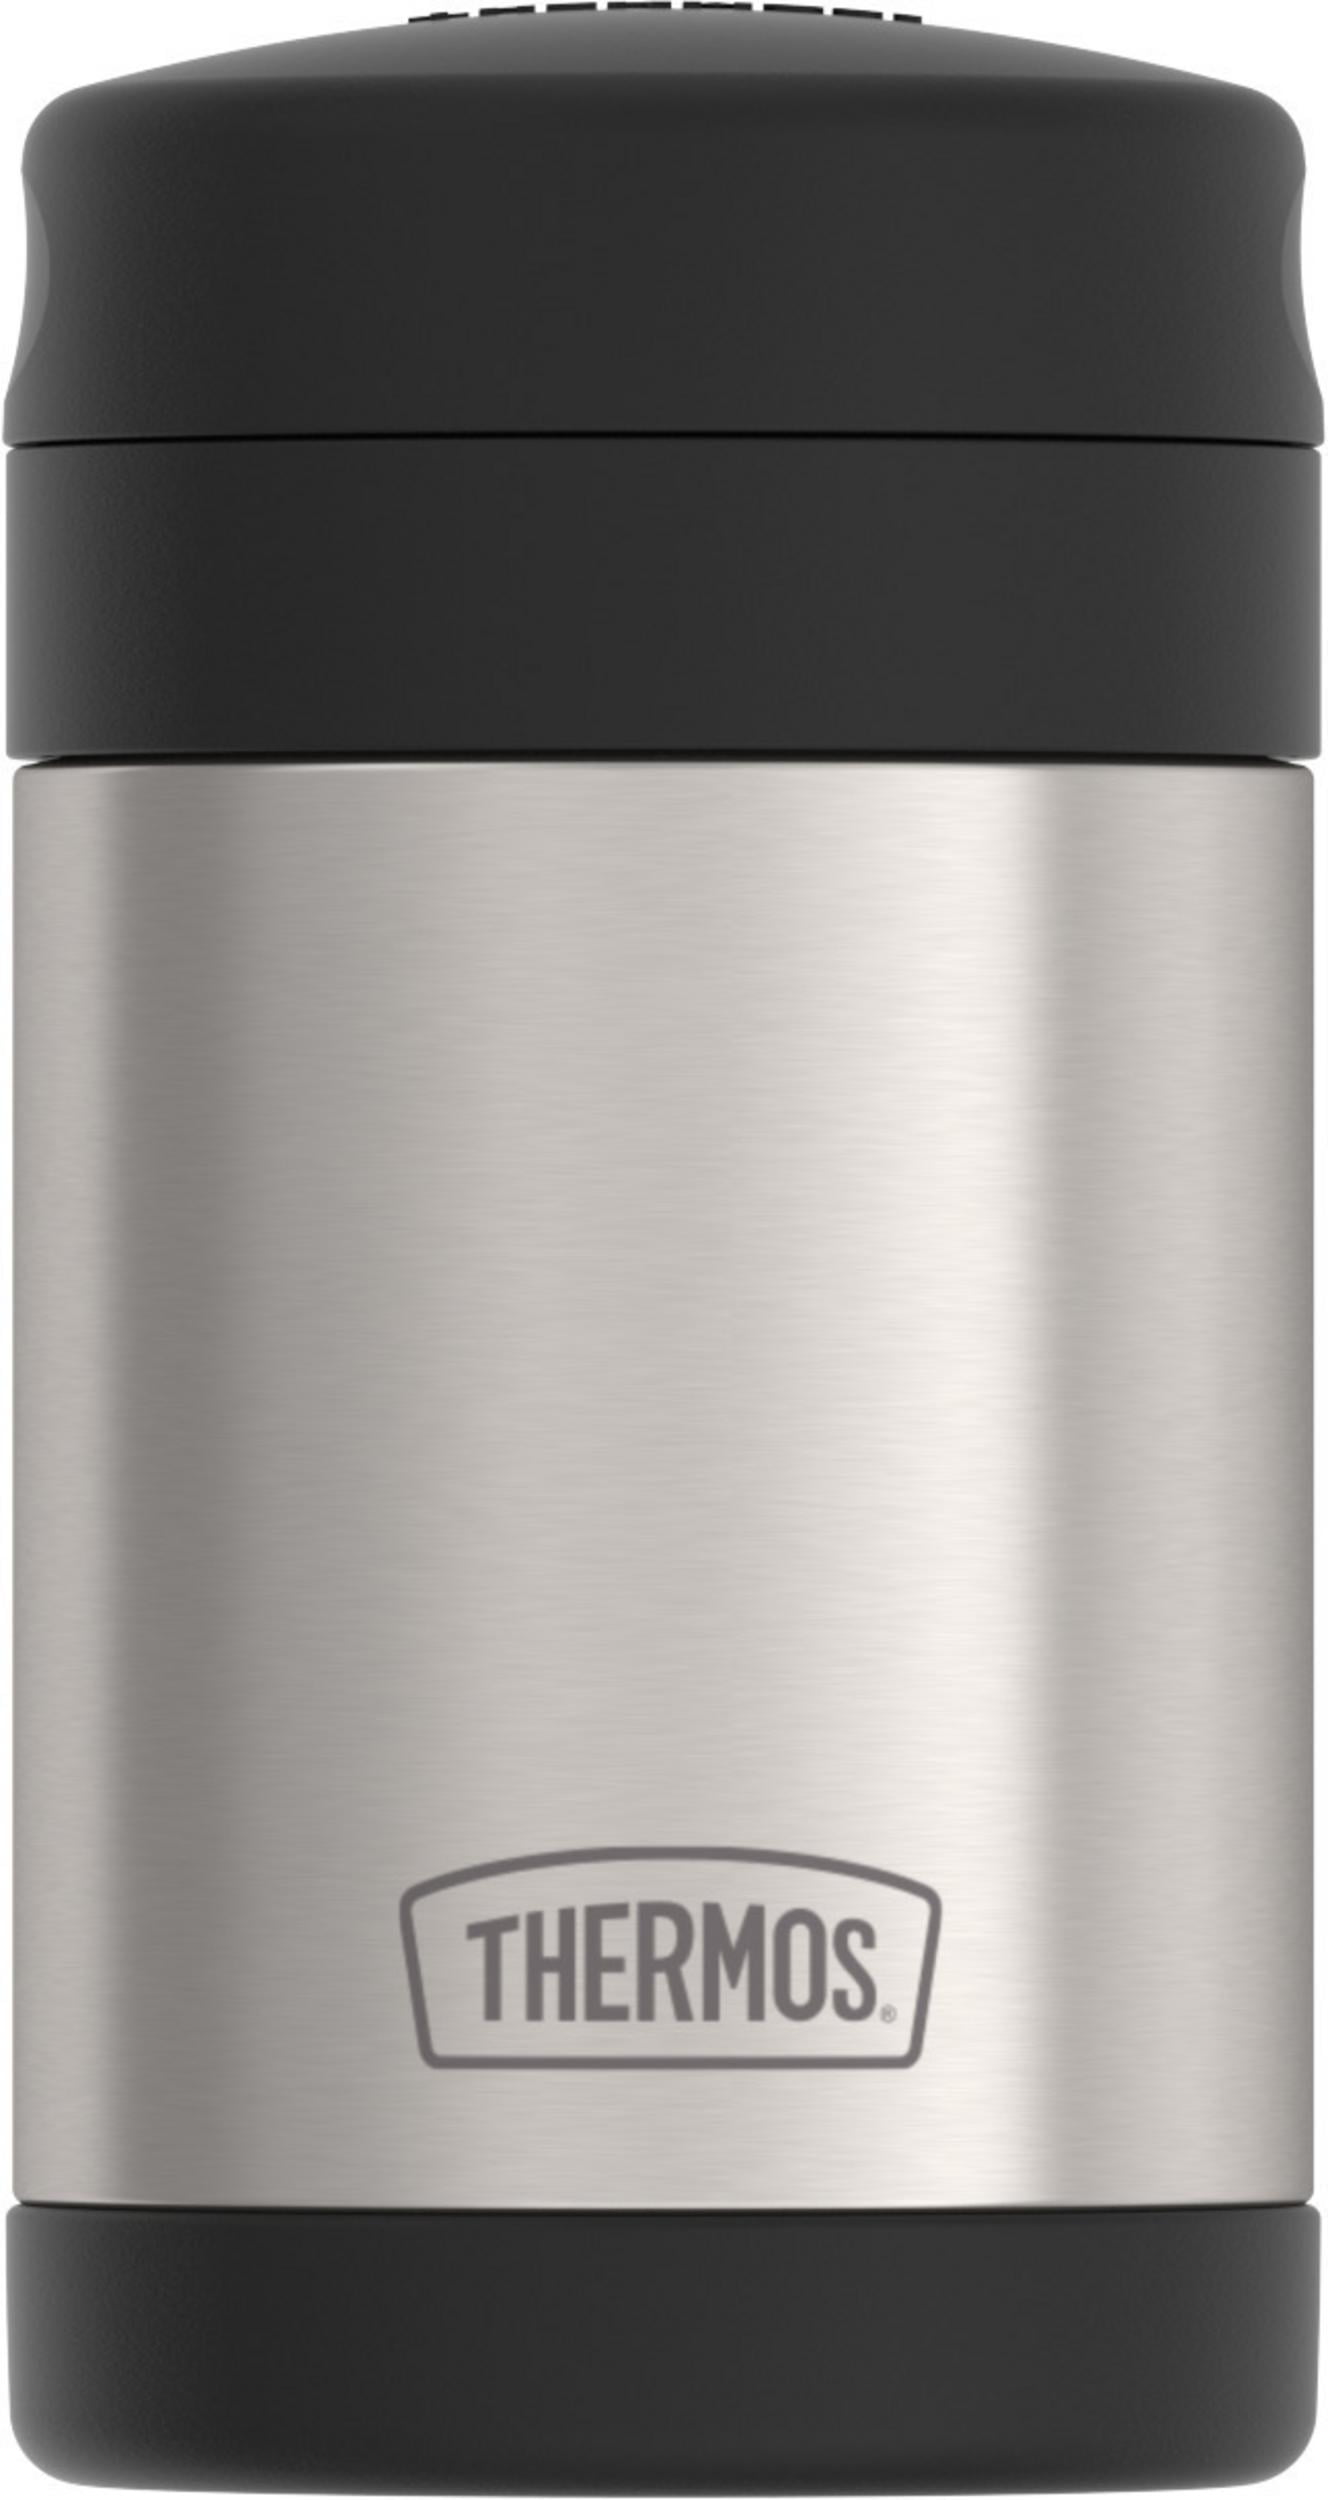 Thermos Sportsman 16 oz stainless steel food jar With foldable Spoon 5.5”  Tall